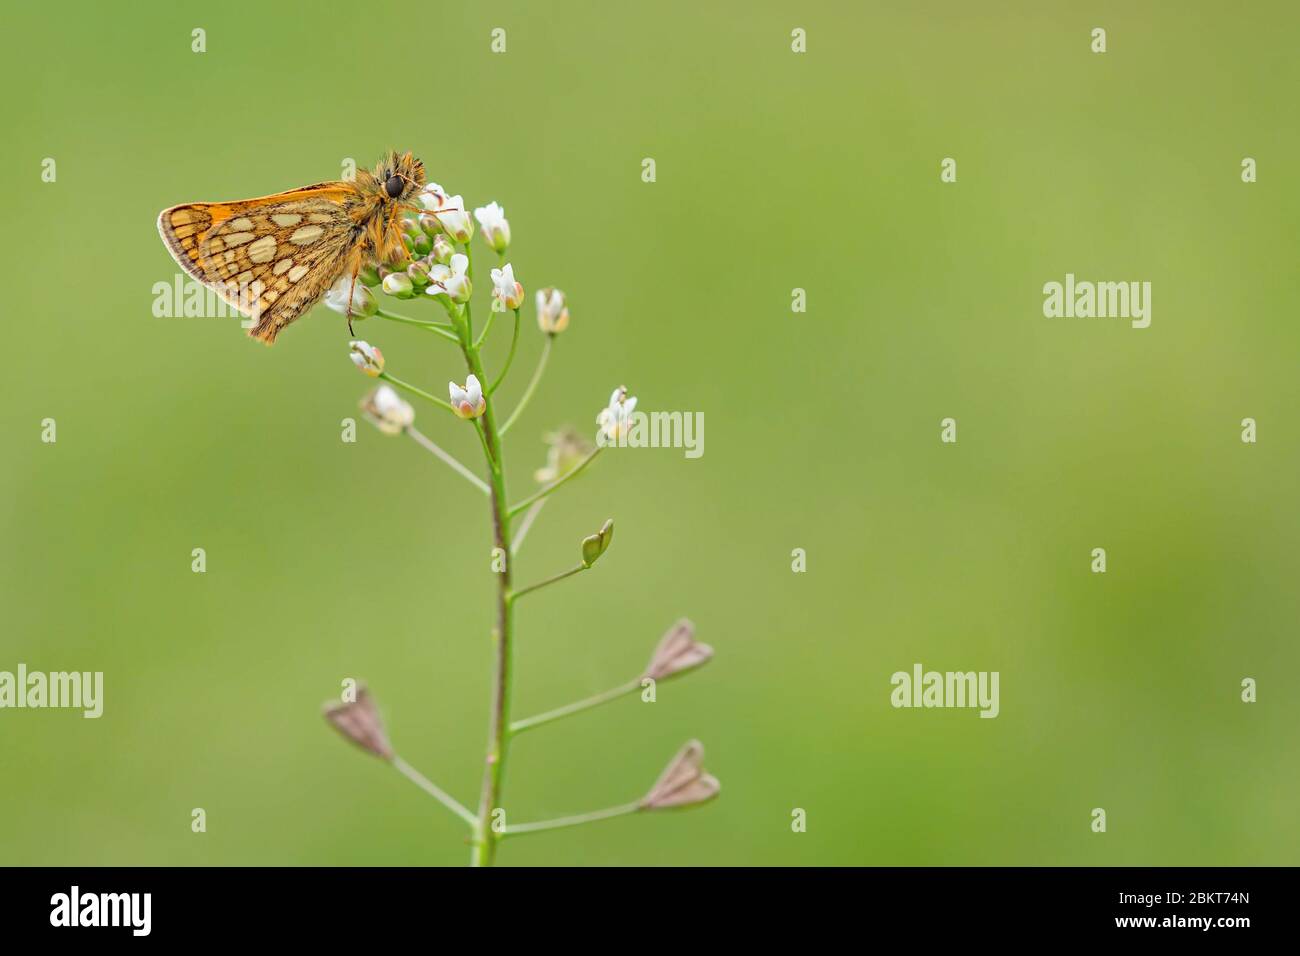 Small woodland butterfly, chequered skipper, with brown eyes and yellow spots on orange wings sitting on white shepherd's-purse flower in a meadow. Stock Photo